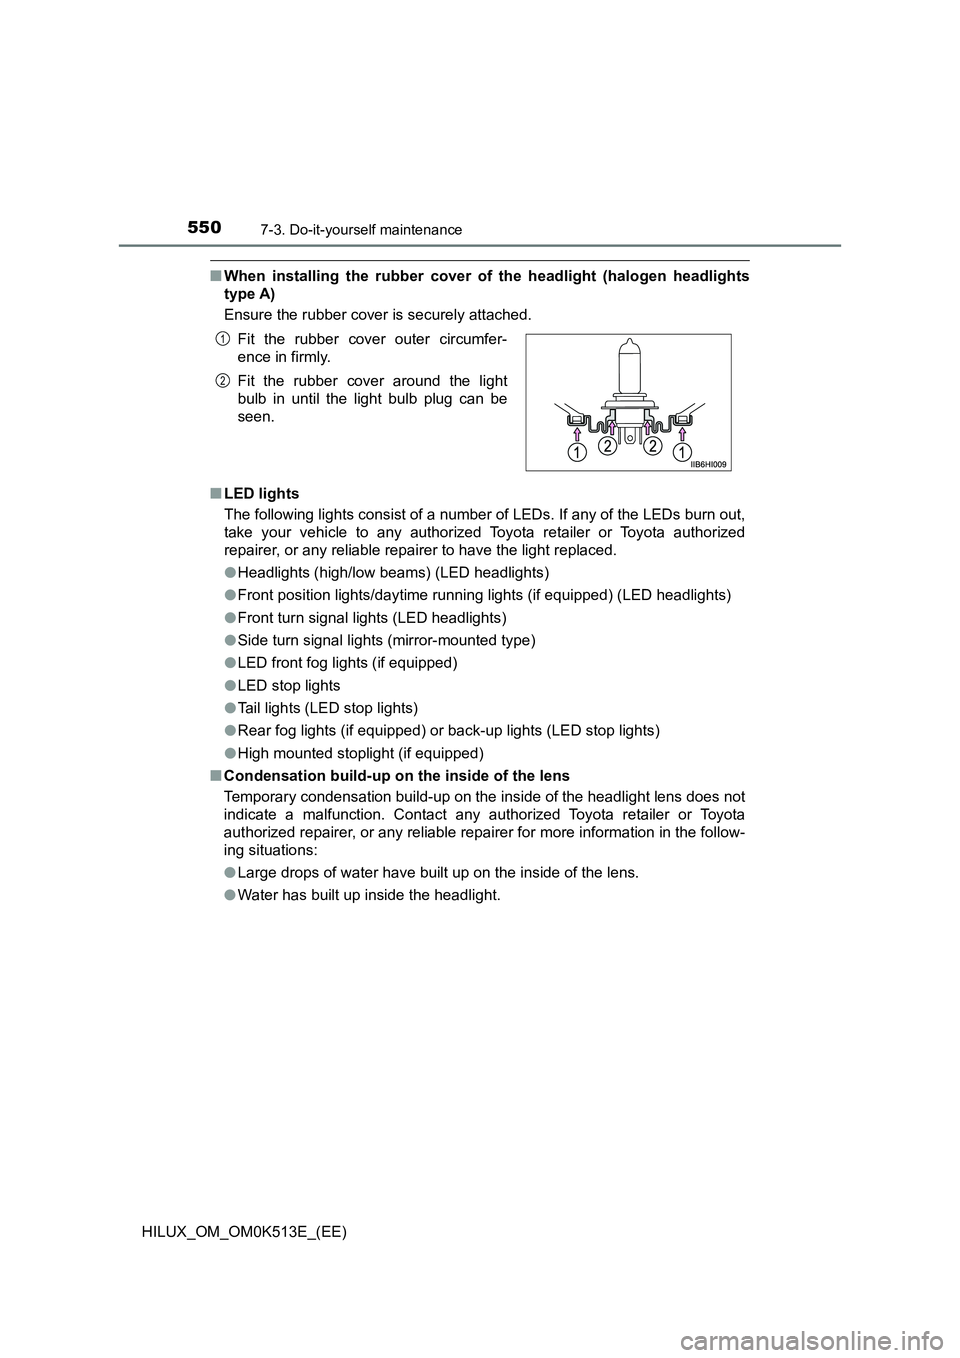 TOYOTA HILUX 2021  Owners Manual (in English) 5507-3. Do-it-yourself maintenance
HILUX_OM_OM0K513E_(EE)
�QWhen installing the rubber cover of the headlight (halogen headlights 
type A) 
Ensure the rubber cover is securely attached. 
�Q LED lights